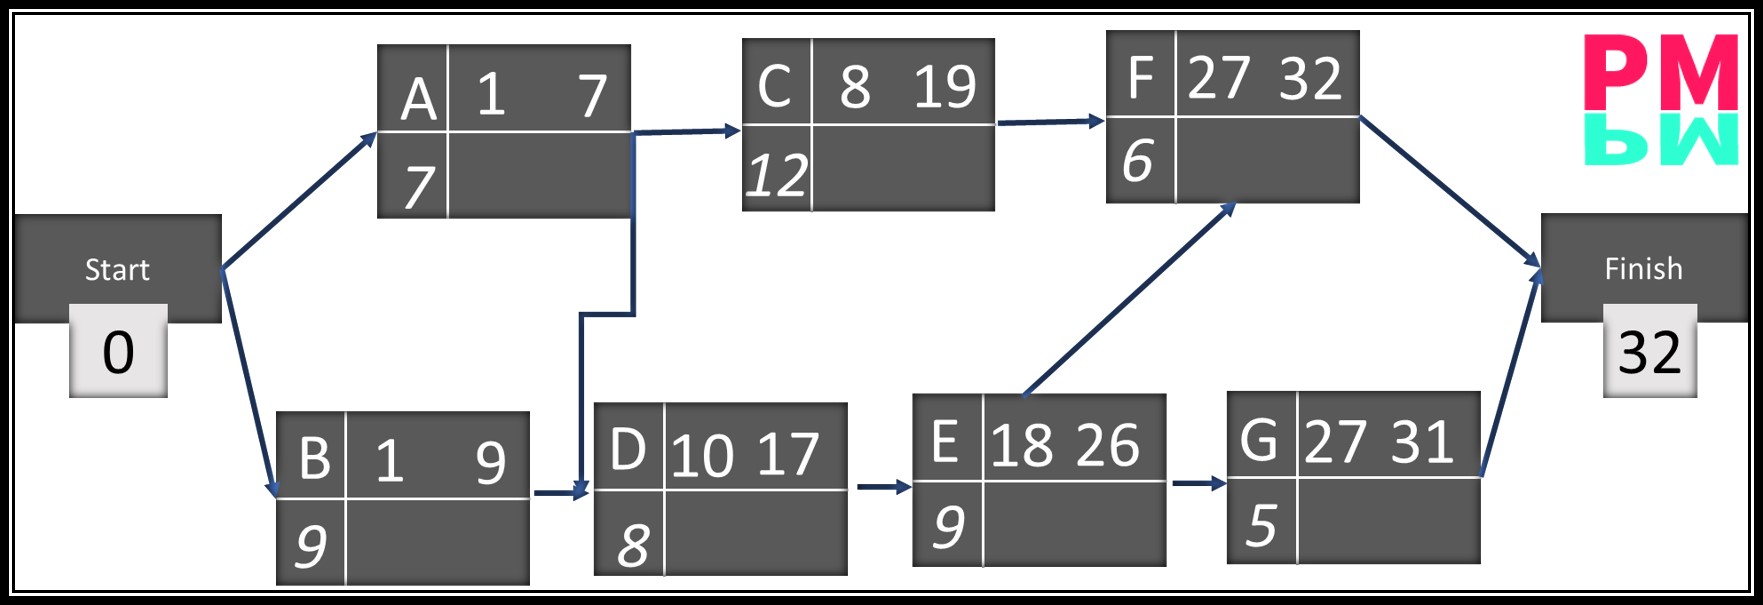 Forward pass on a network diagram